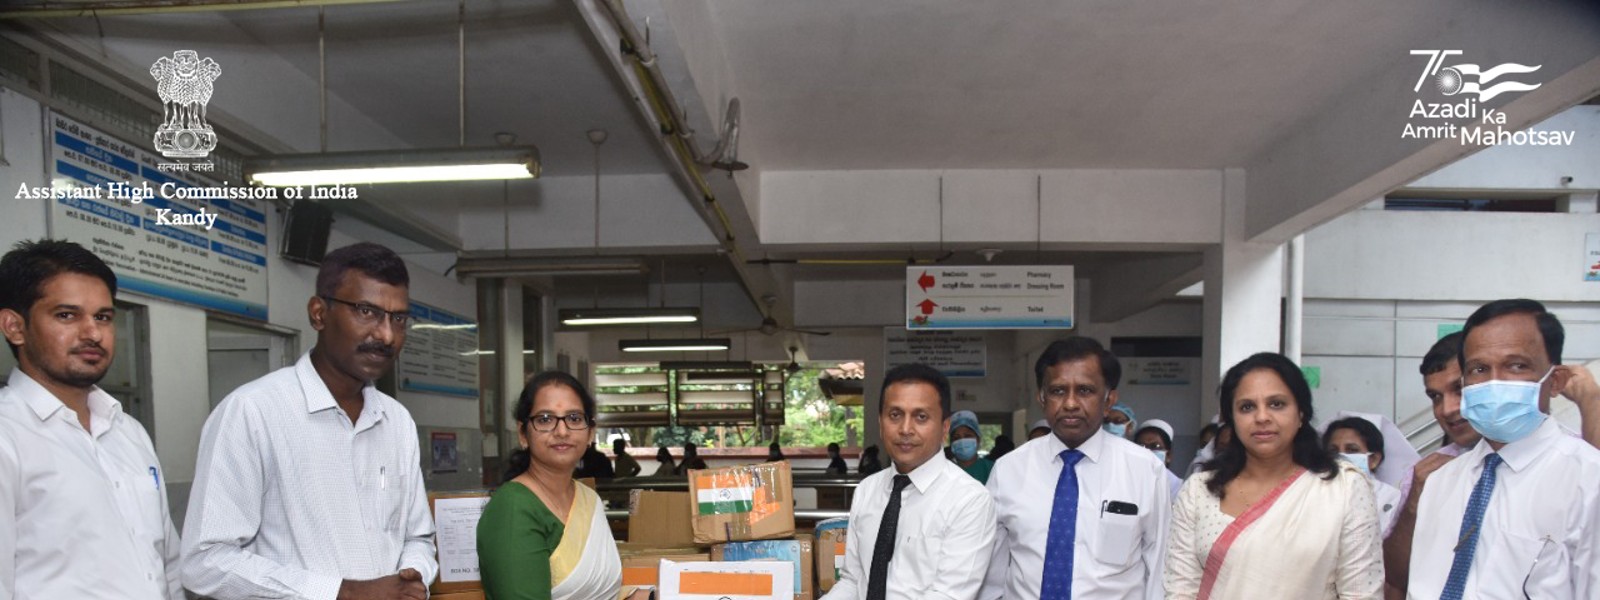 Essential medical supplies from India reach Kandy